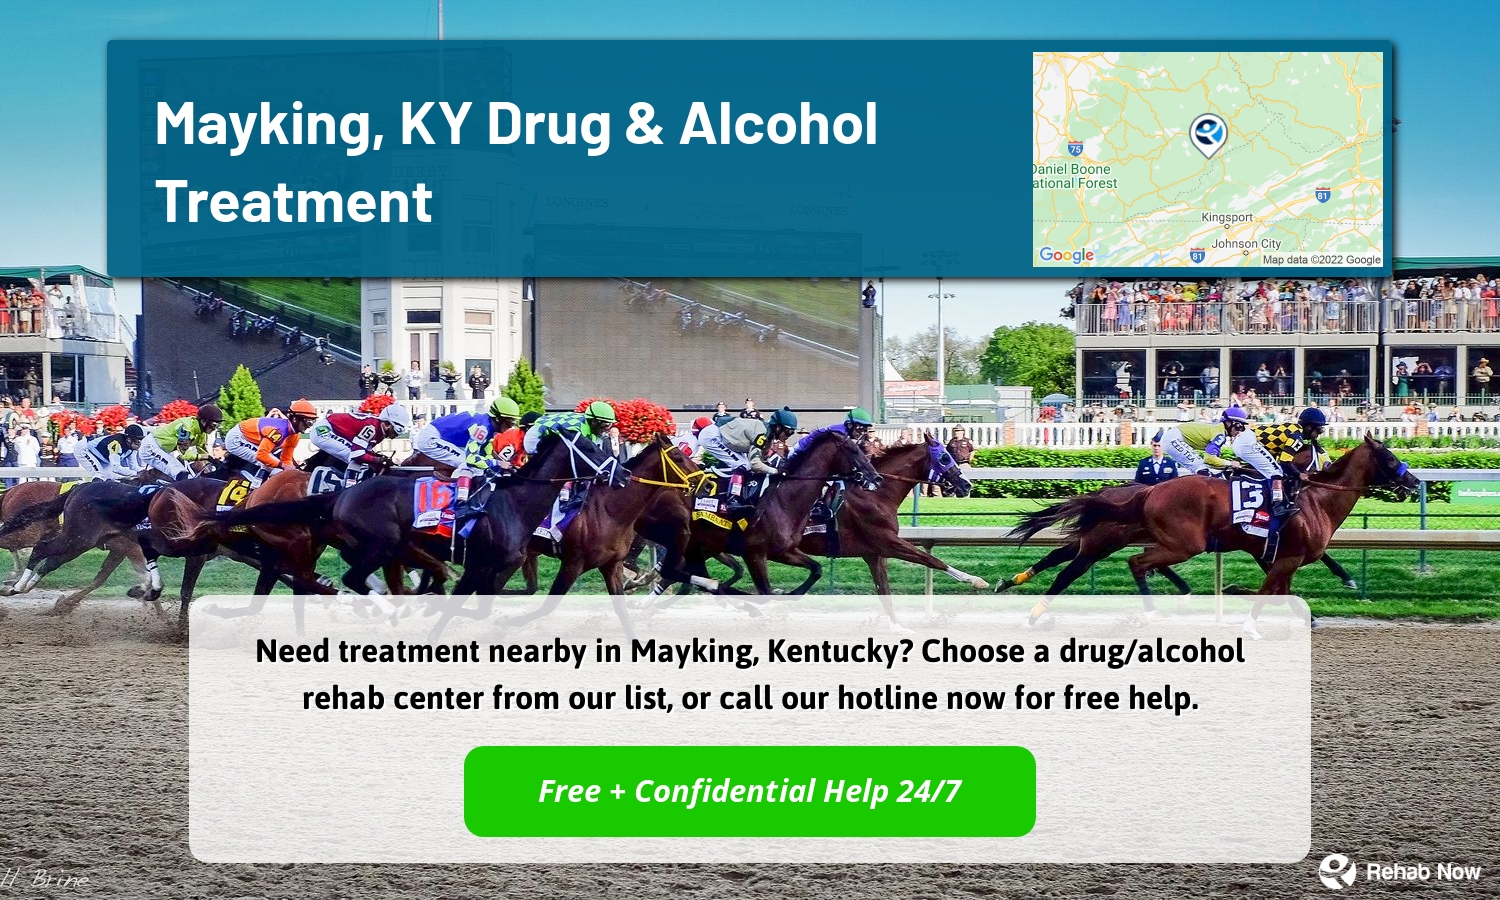 Need treatment nearby in Mayking, Kentucky? Choose a drug/alcohol rehab center from our list, or call our hotline now for free help.